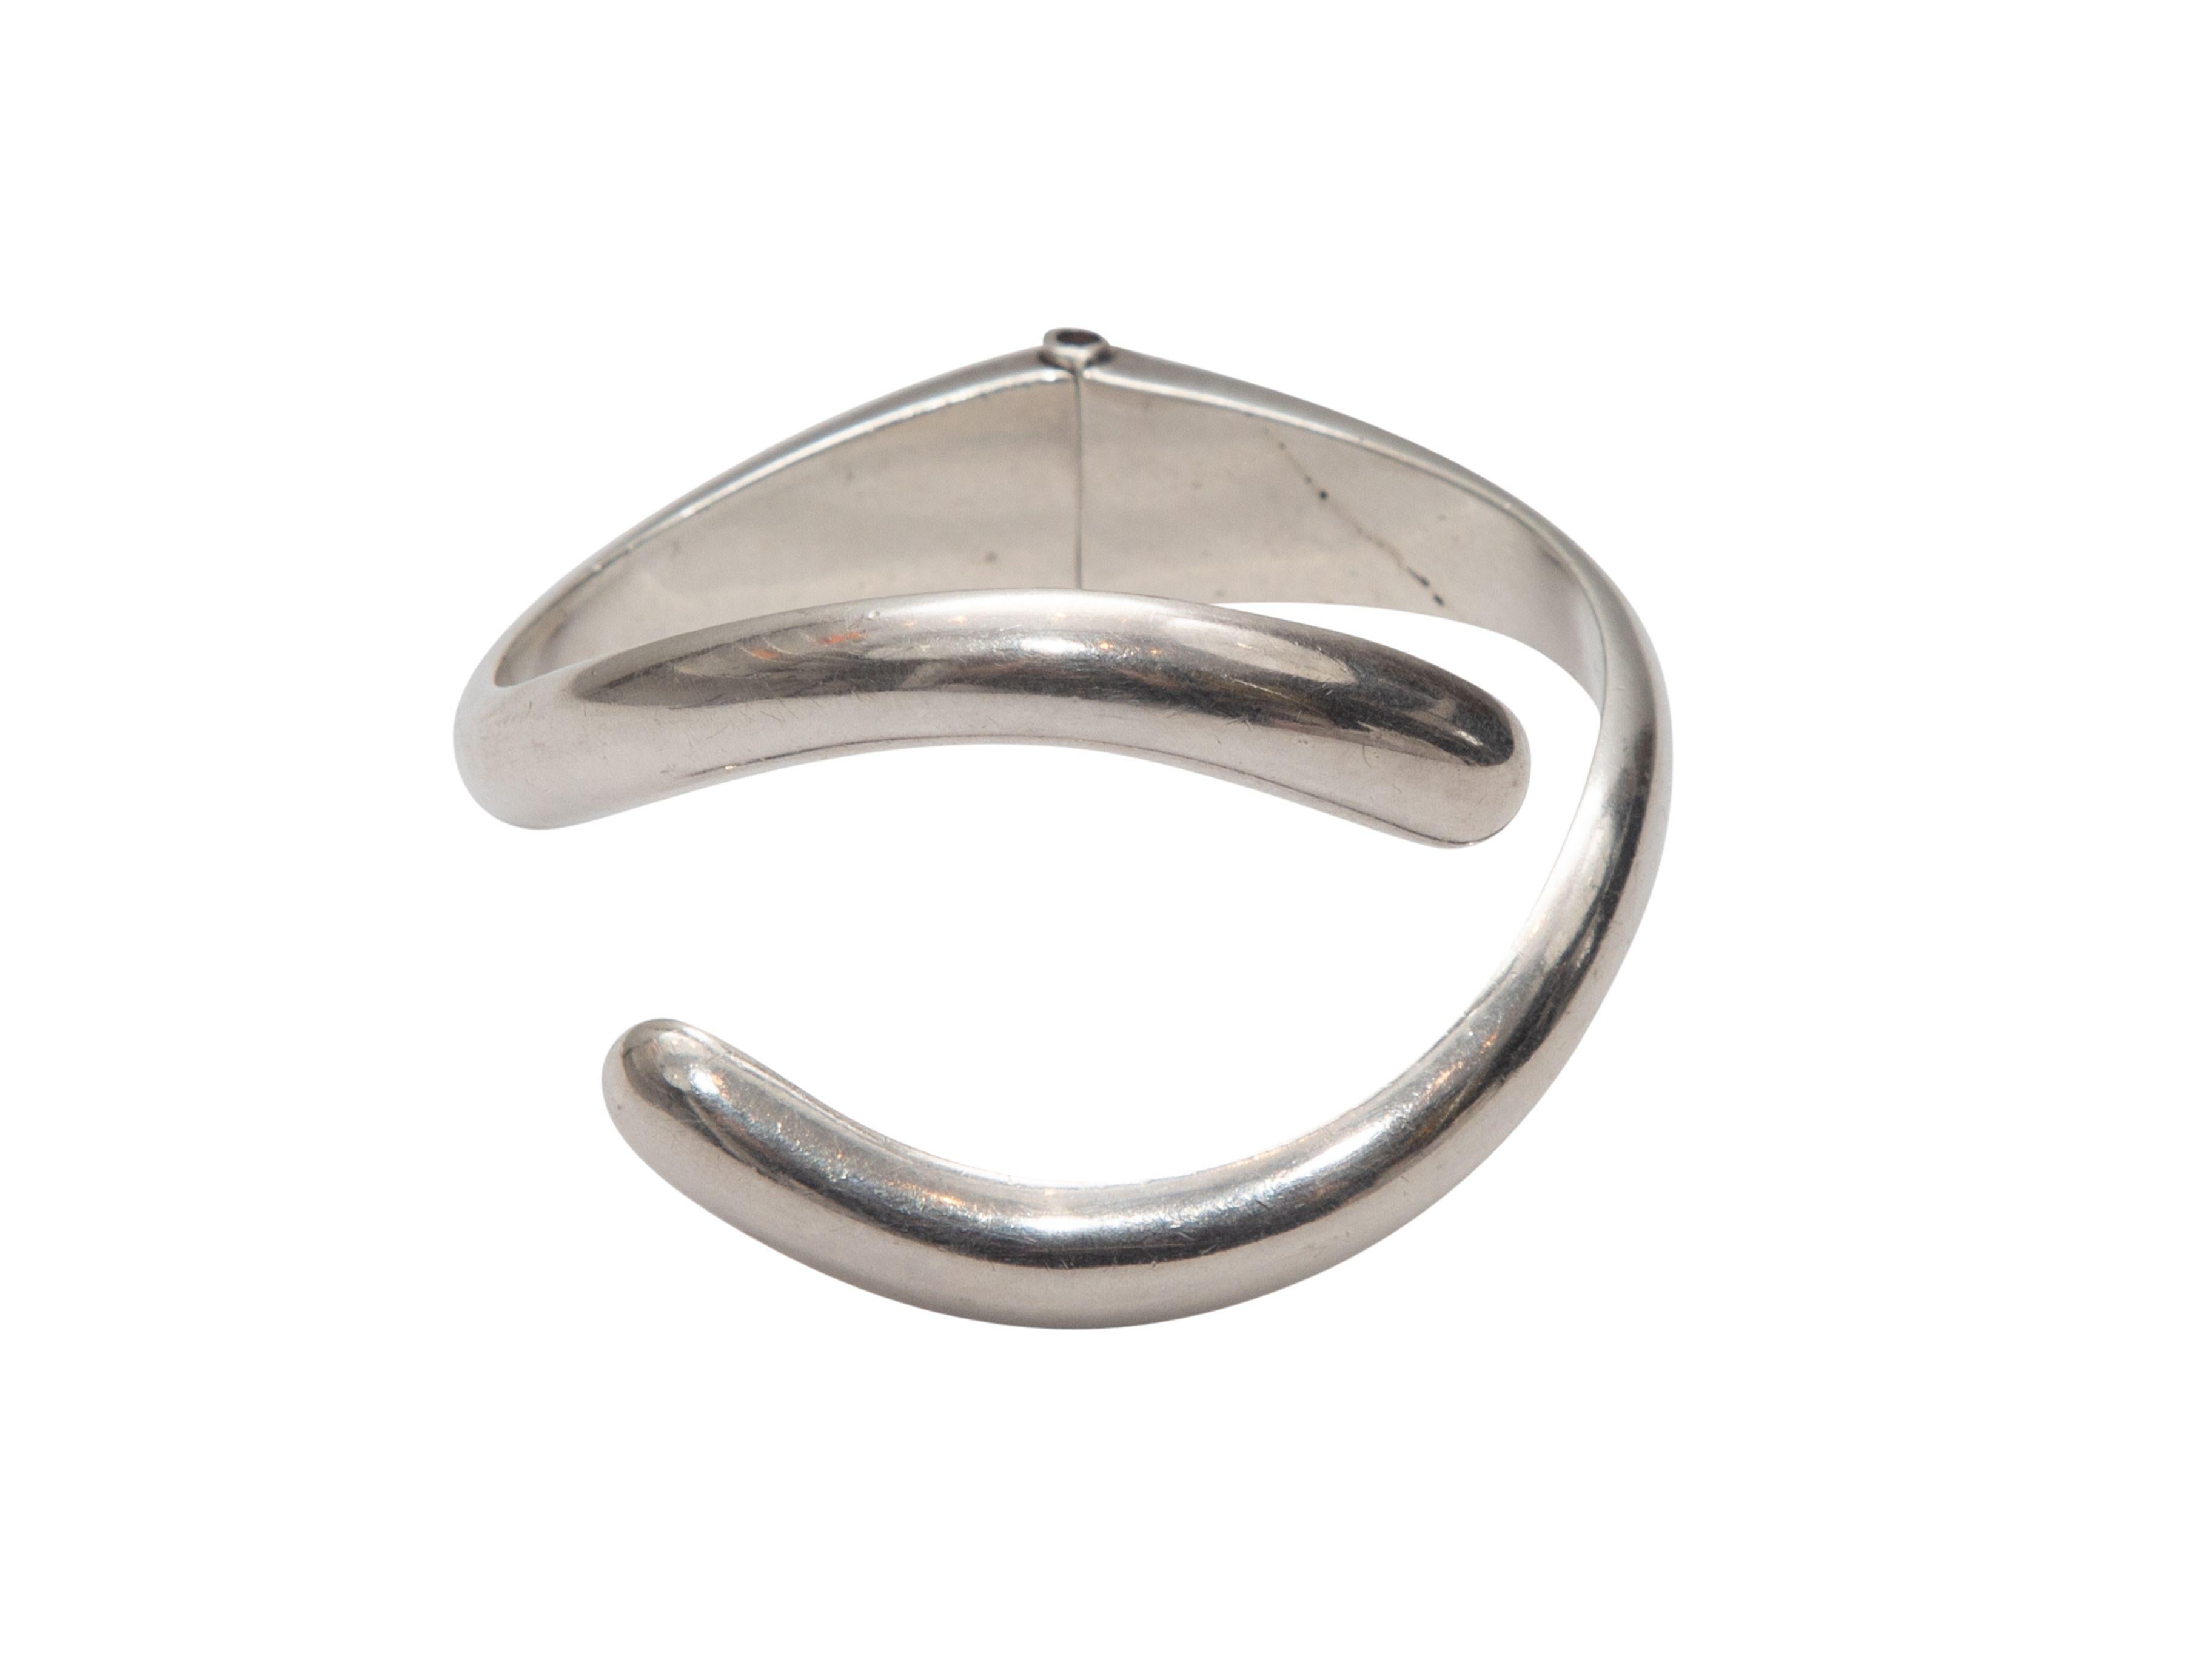 Product Details: Sterling silver Bypass hinged cuff bracelet by Sigi Pineda. 1.5